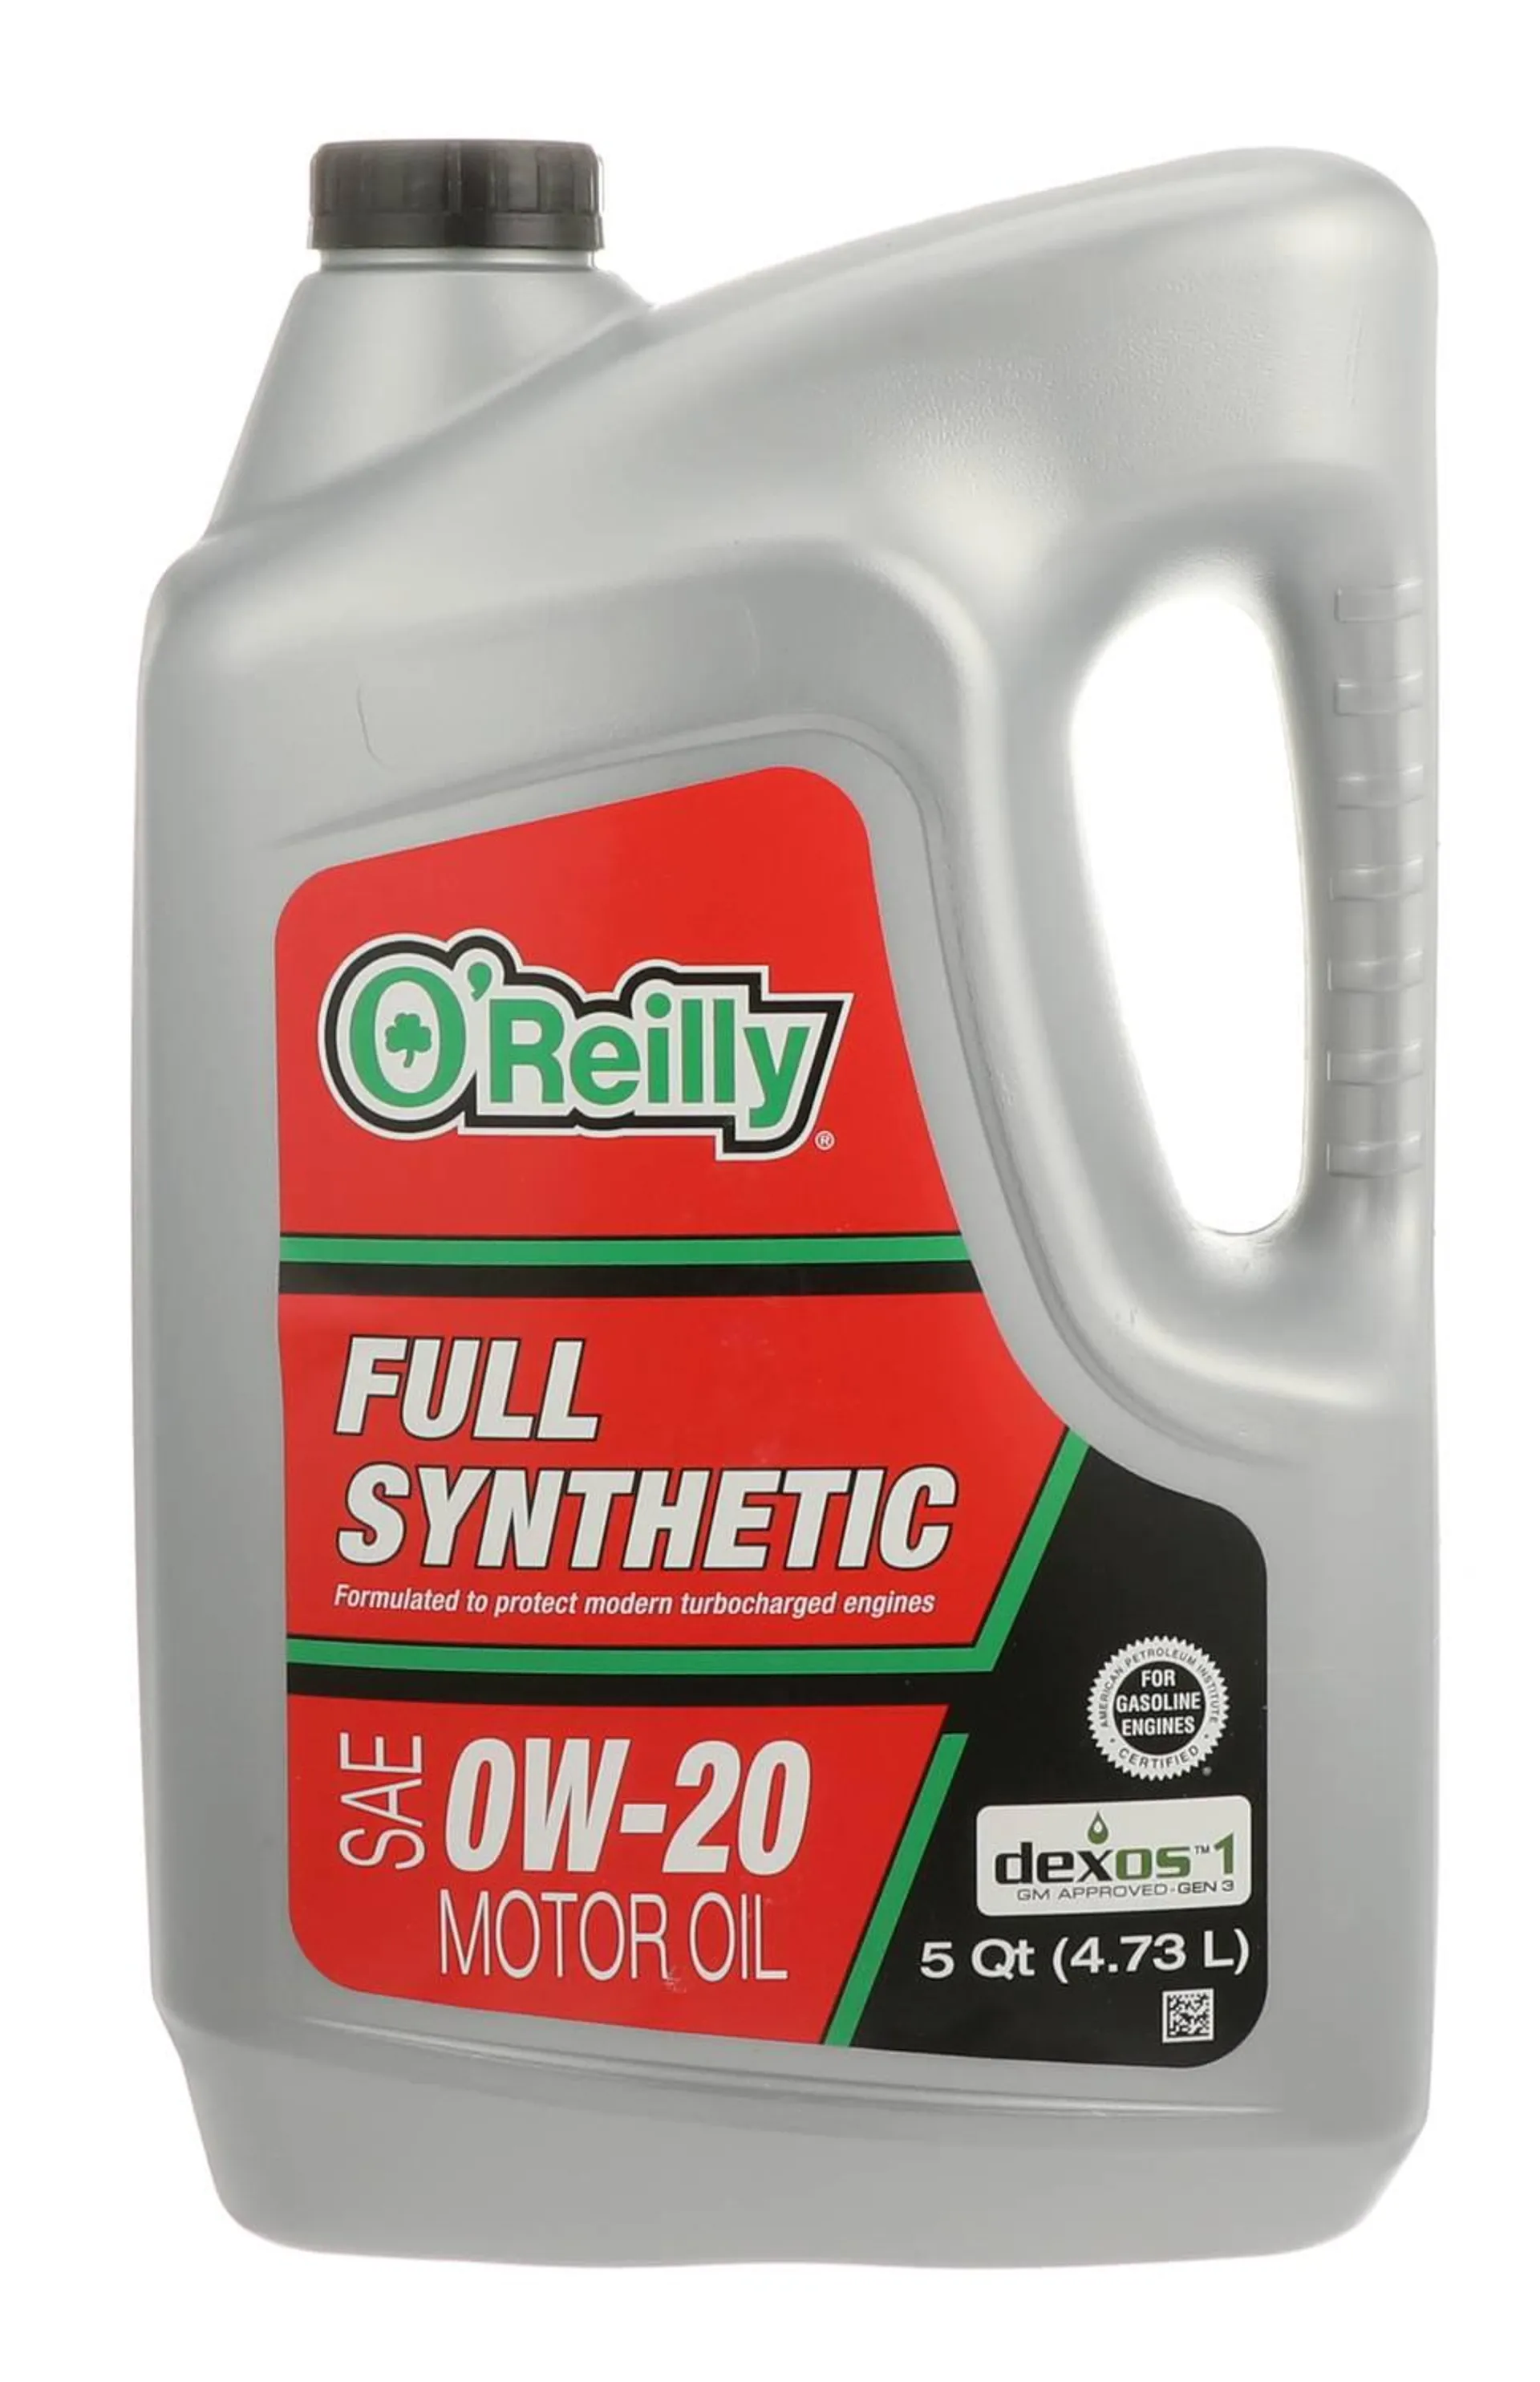 O'Reilly Full Synthetic Full Synthetic Motor Oil 0W-20 5 Quart - SYN0-20-5QT